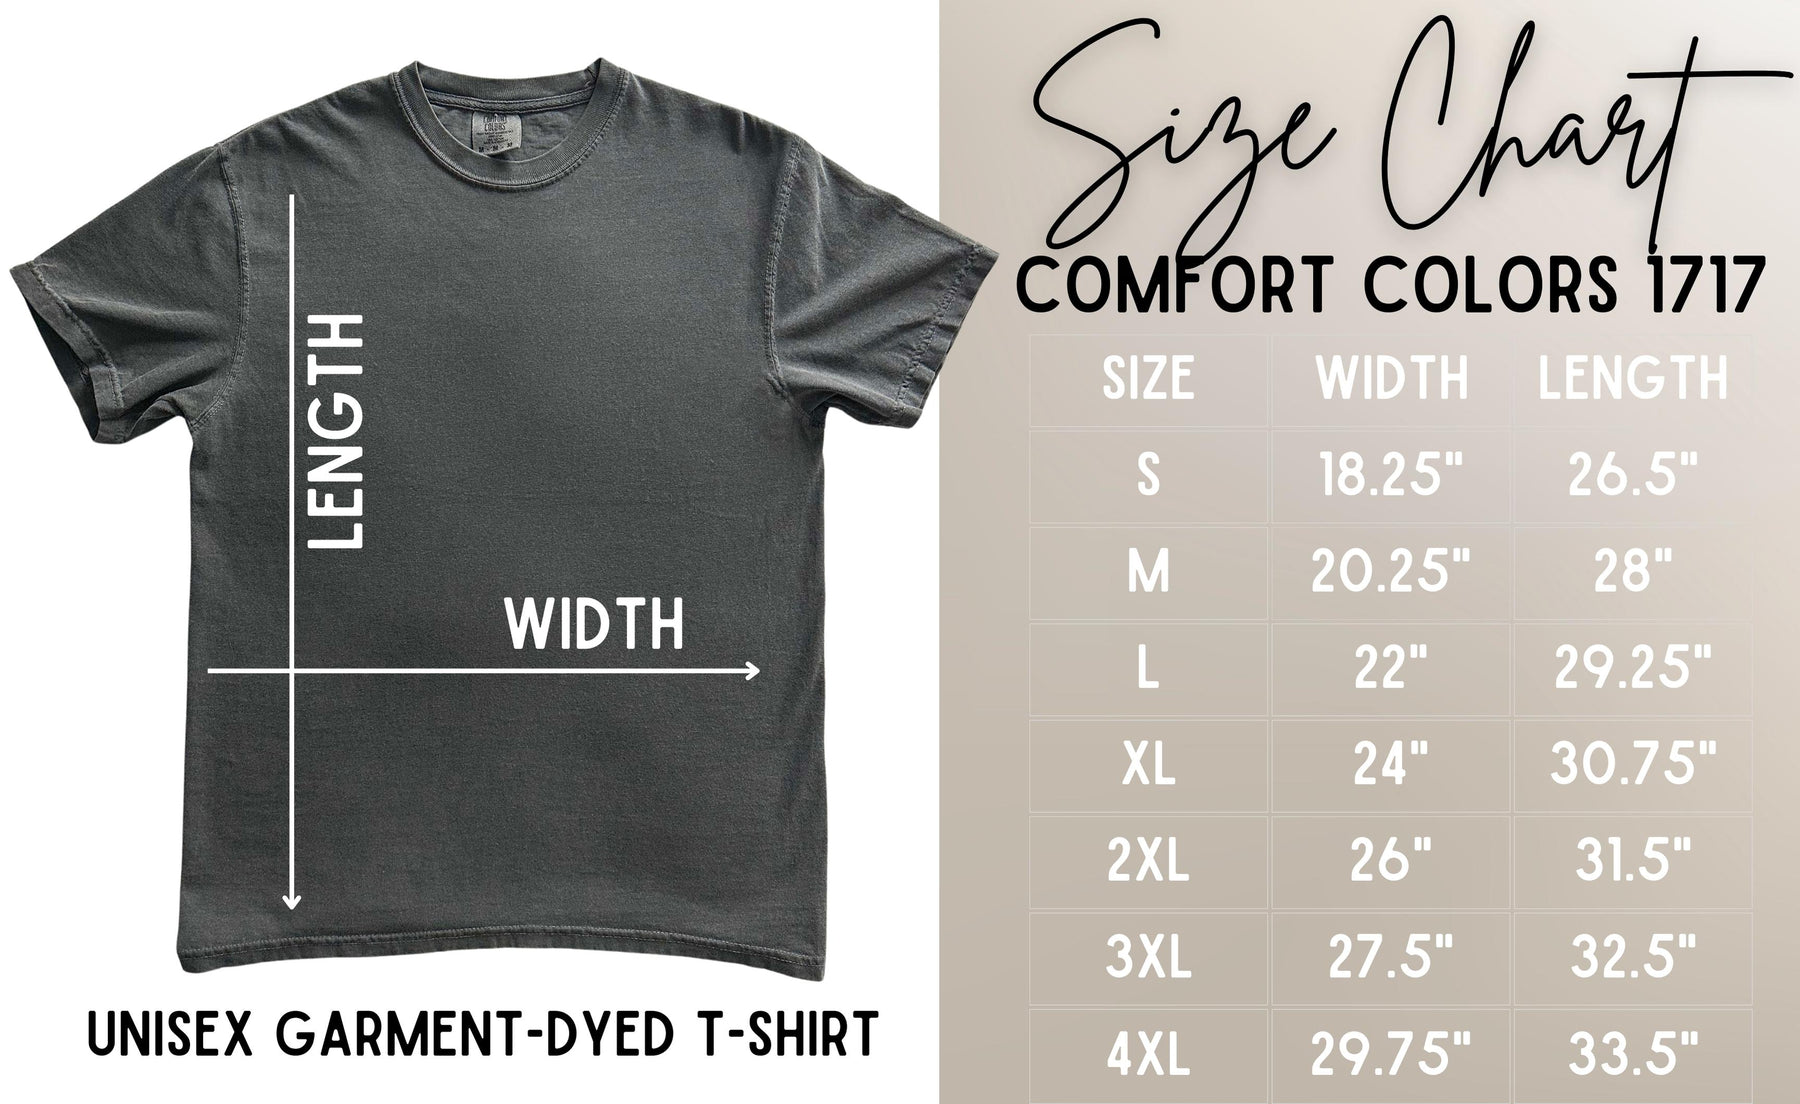 BooHaw - Comfort Colors T-Shirt Rose with Grace LLC